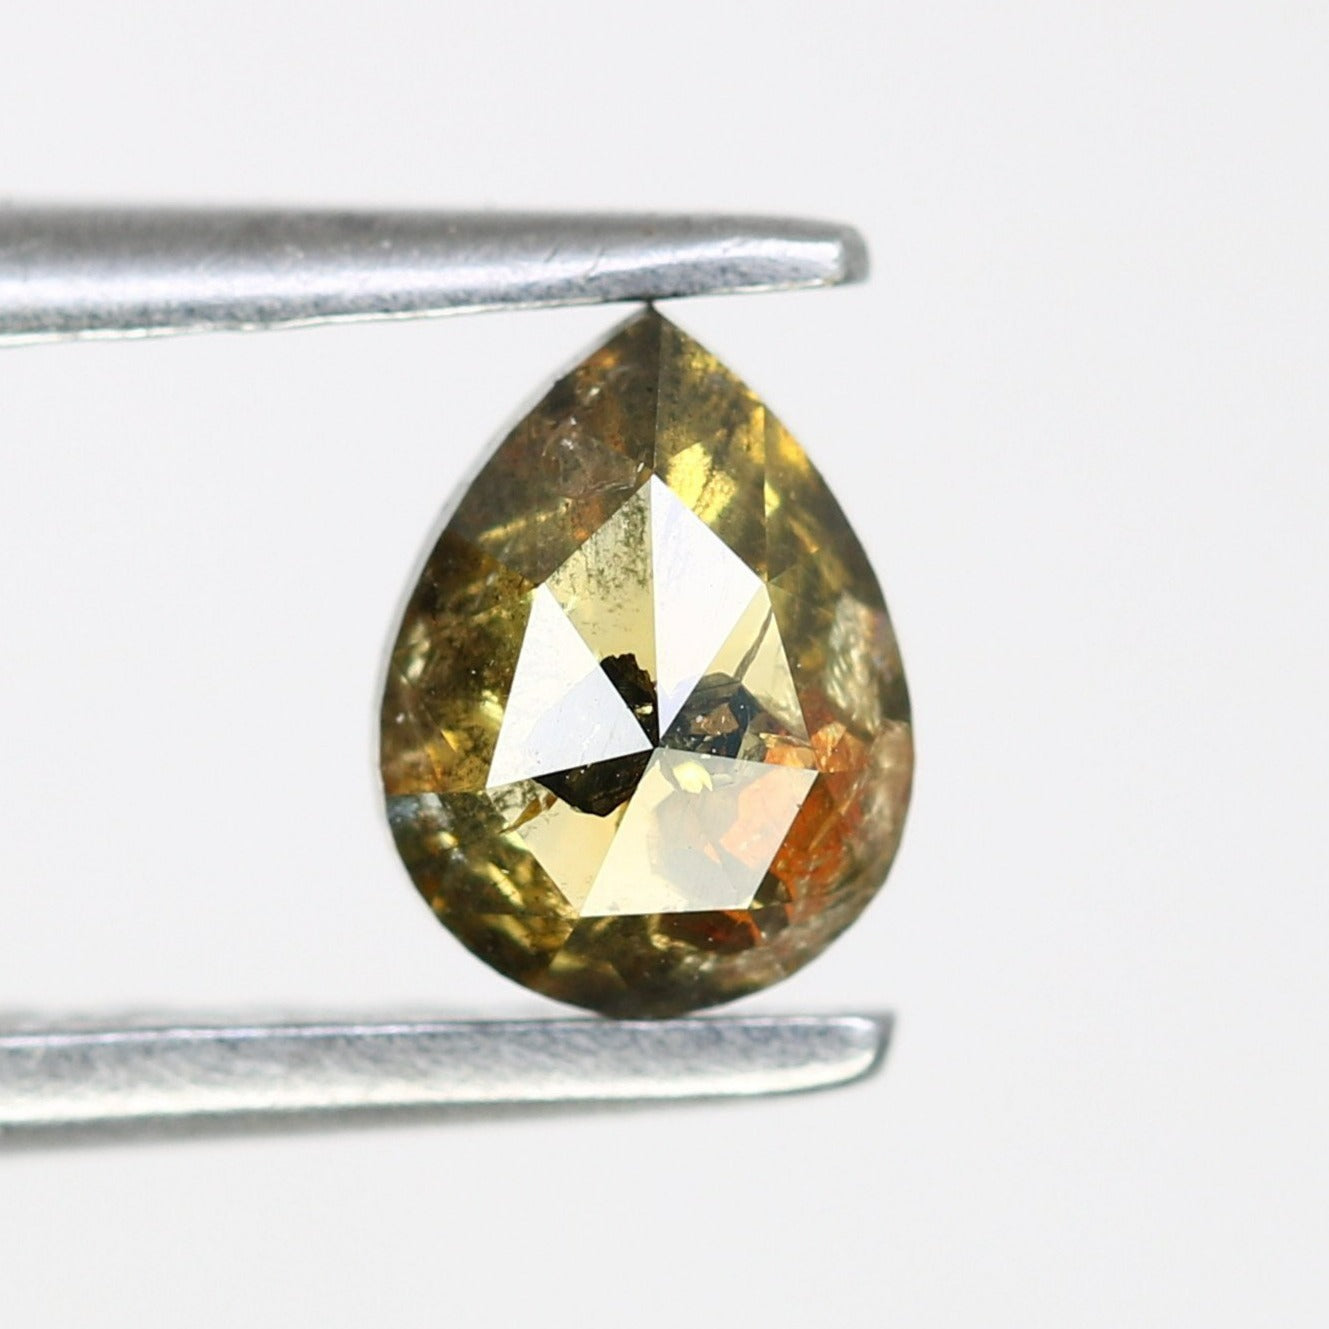 0.44 CT Fancy Brown Color Loose Pear Shaped Diamond For Engagement Ring